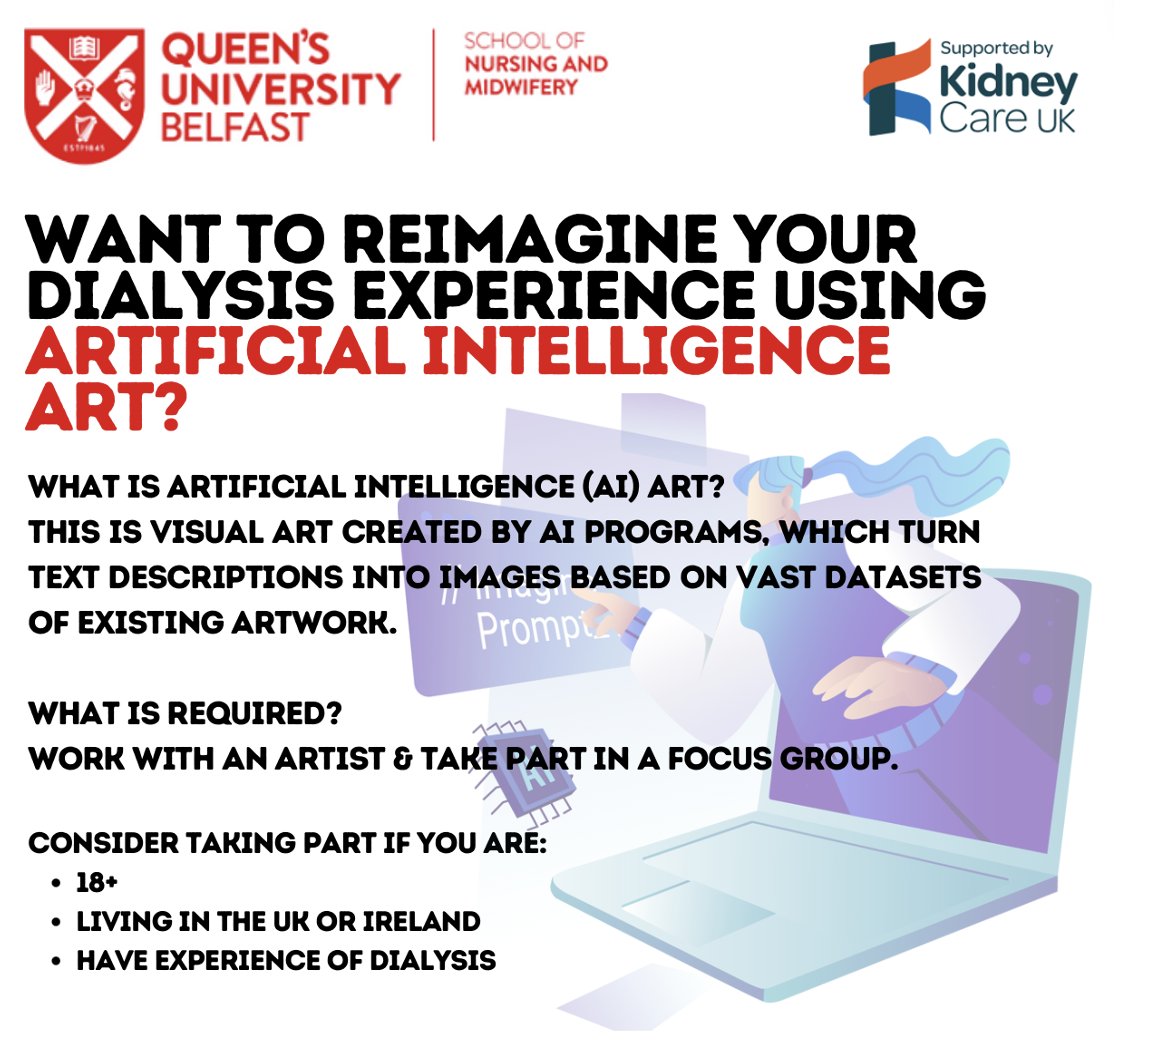 Have you experienced #dialysis? We want to hear from you to help shape the future of dialysis care using A.I. and art! Please share and contact renal@qub.ac.uk for more info 📨